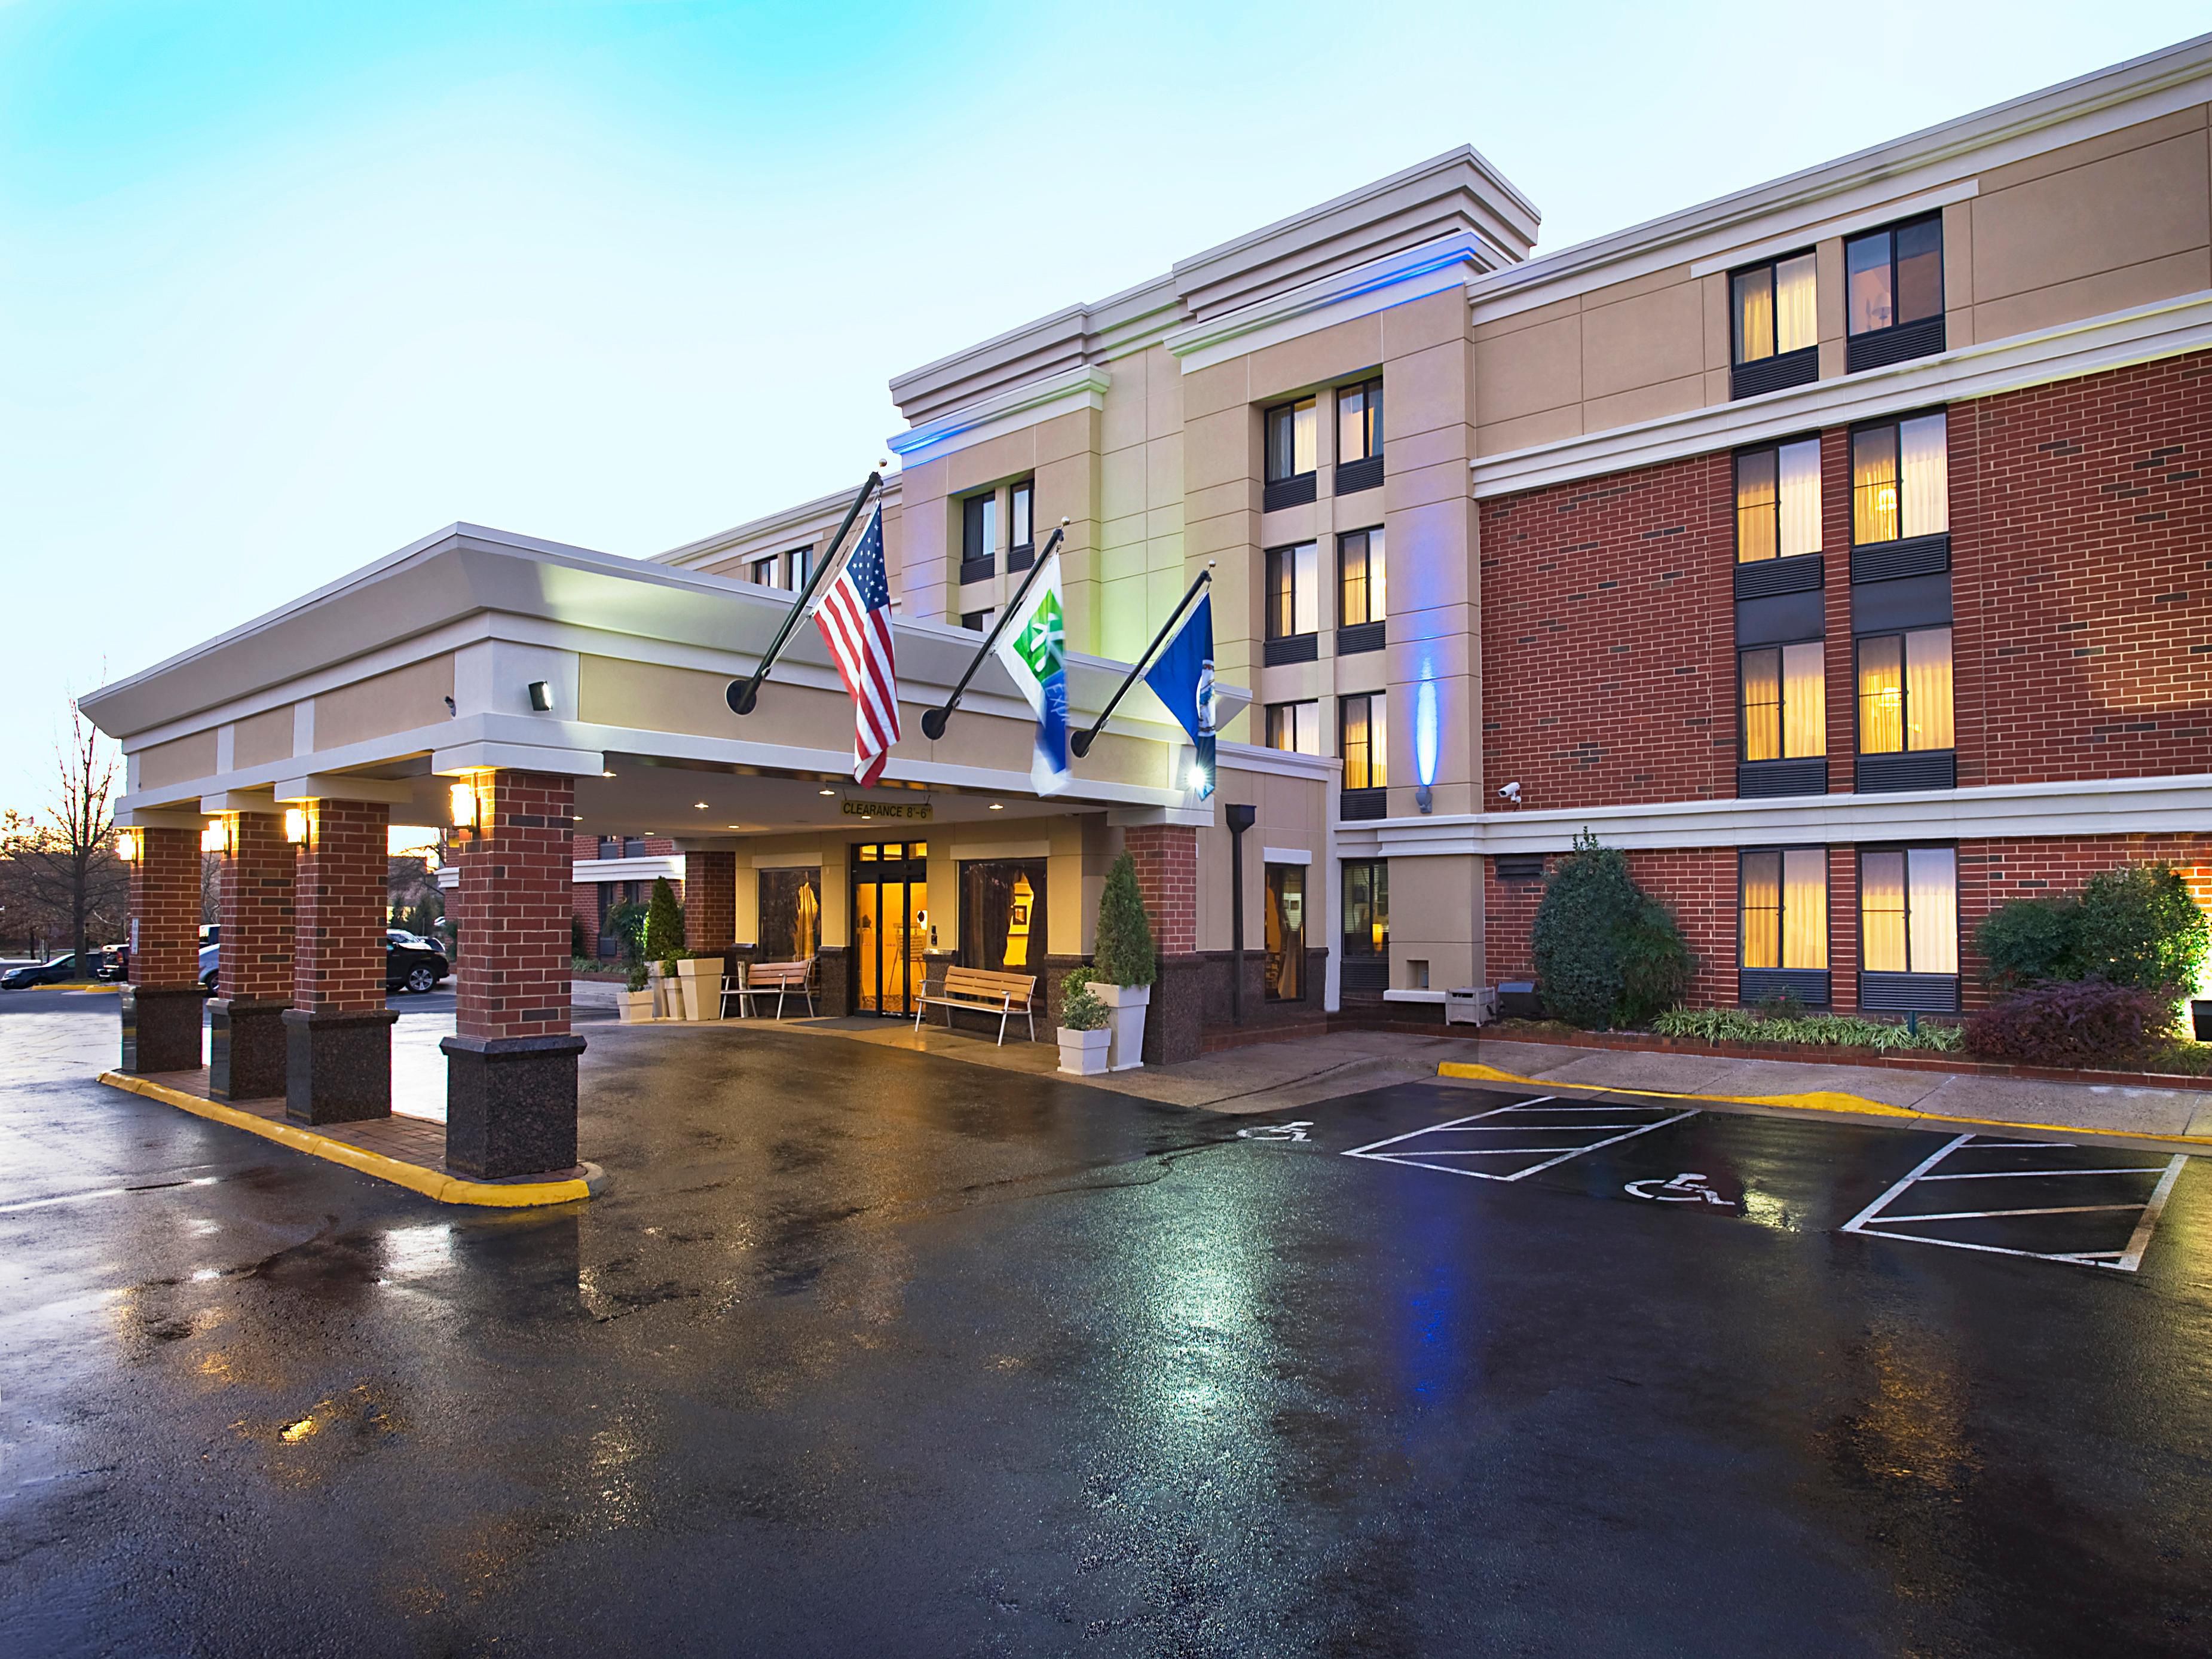 The hotel which is six miles from the Dulles International Airport will be managed by B F Saul Company Hospitality Group